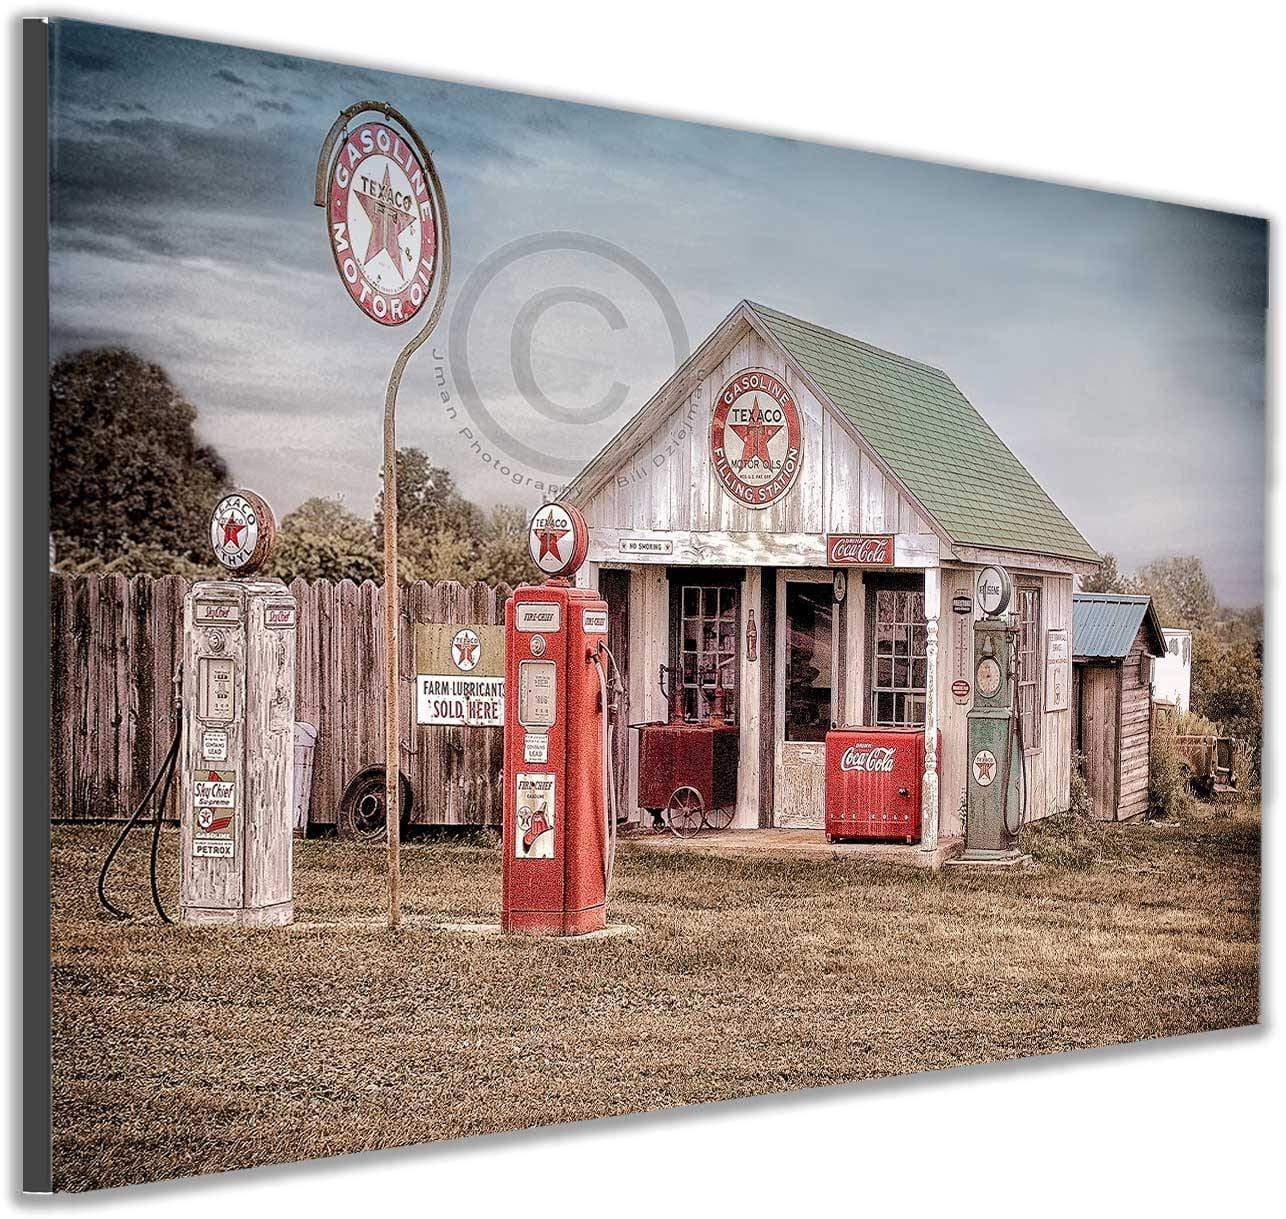 Texaco #1 Vintage gas station and pumps